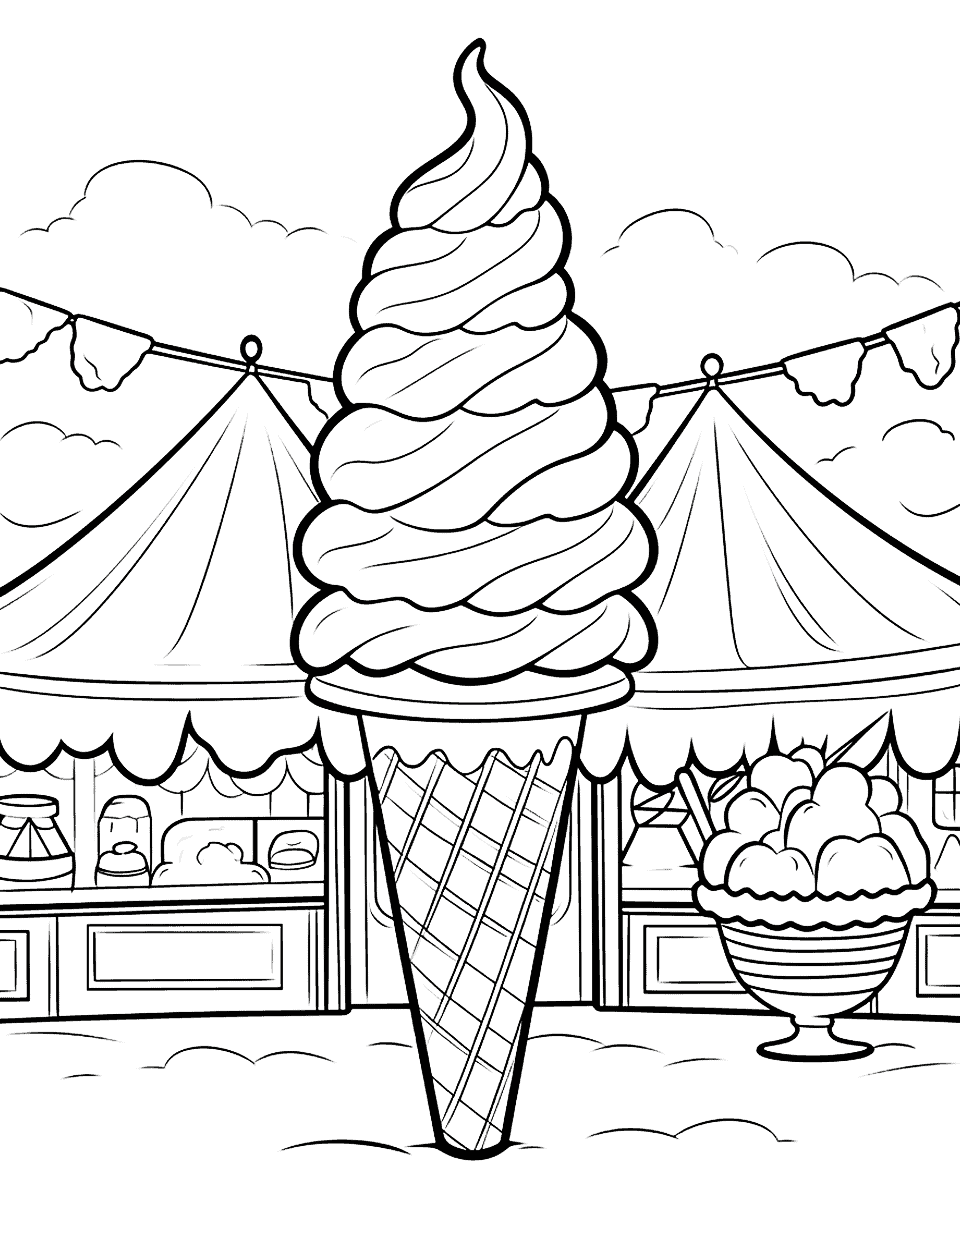 Carnival Ice Cream Stall Coloring Page - A vibrant carnival scene with an ice cream stall.